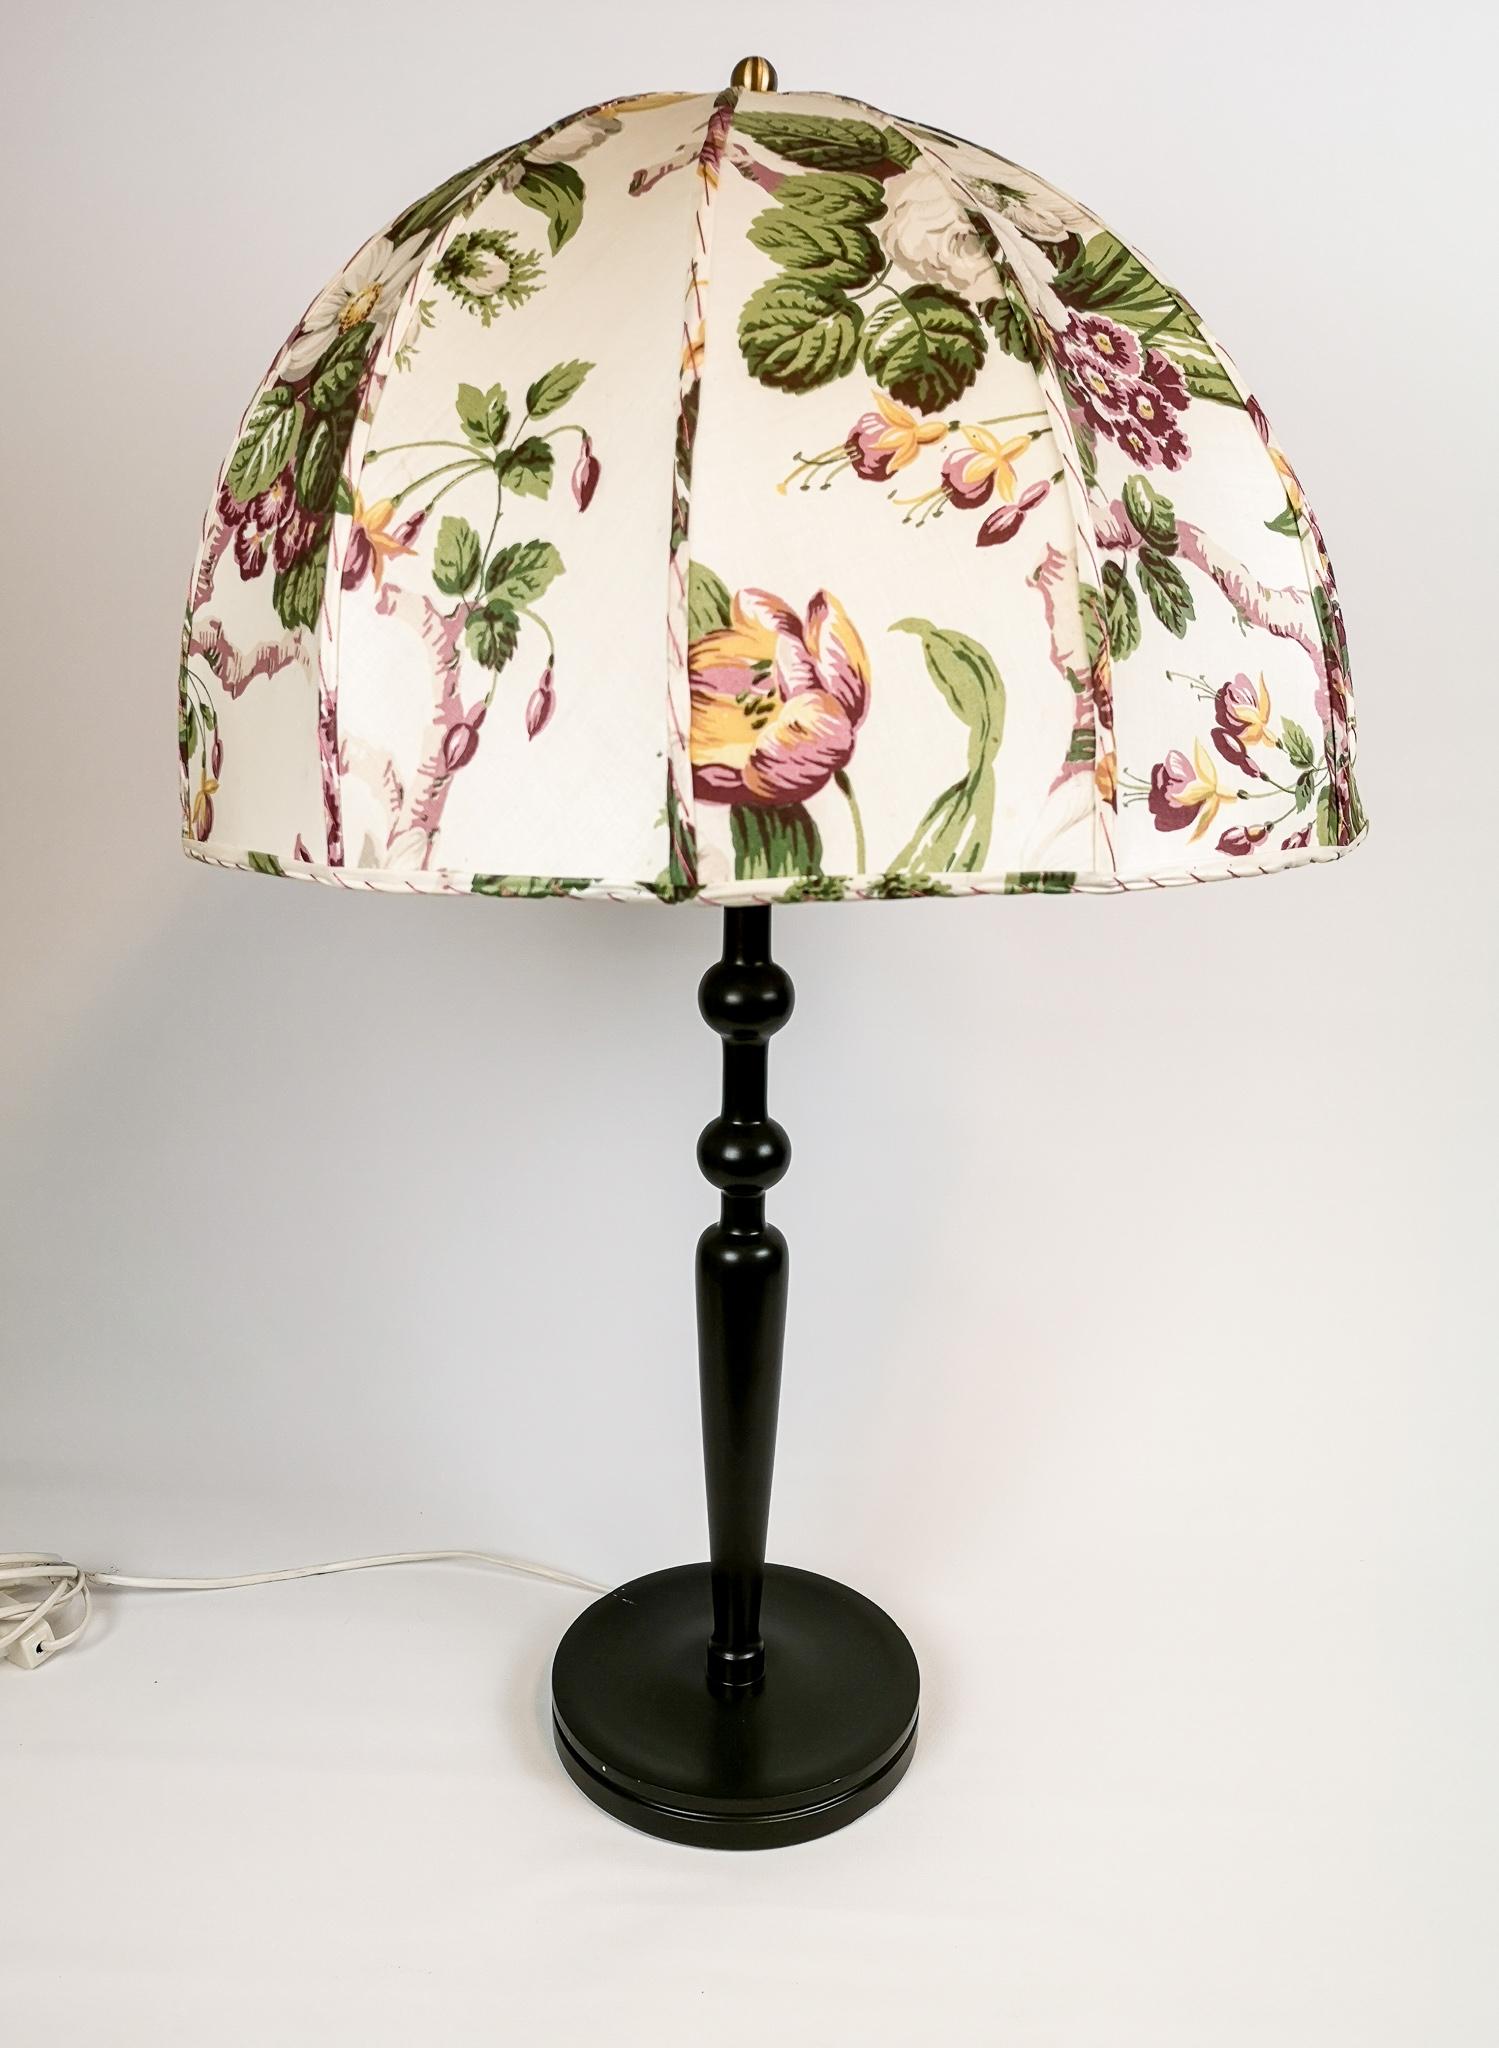 Wonderful large table lamp produced for Svenskt Tenn and designed by Josef Frank.
The base is made of painted wood dark green. The original shade handmade with different flower pattern. 

Nice original condition. Some stains on shade and